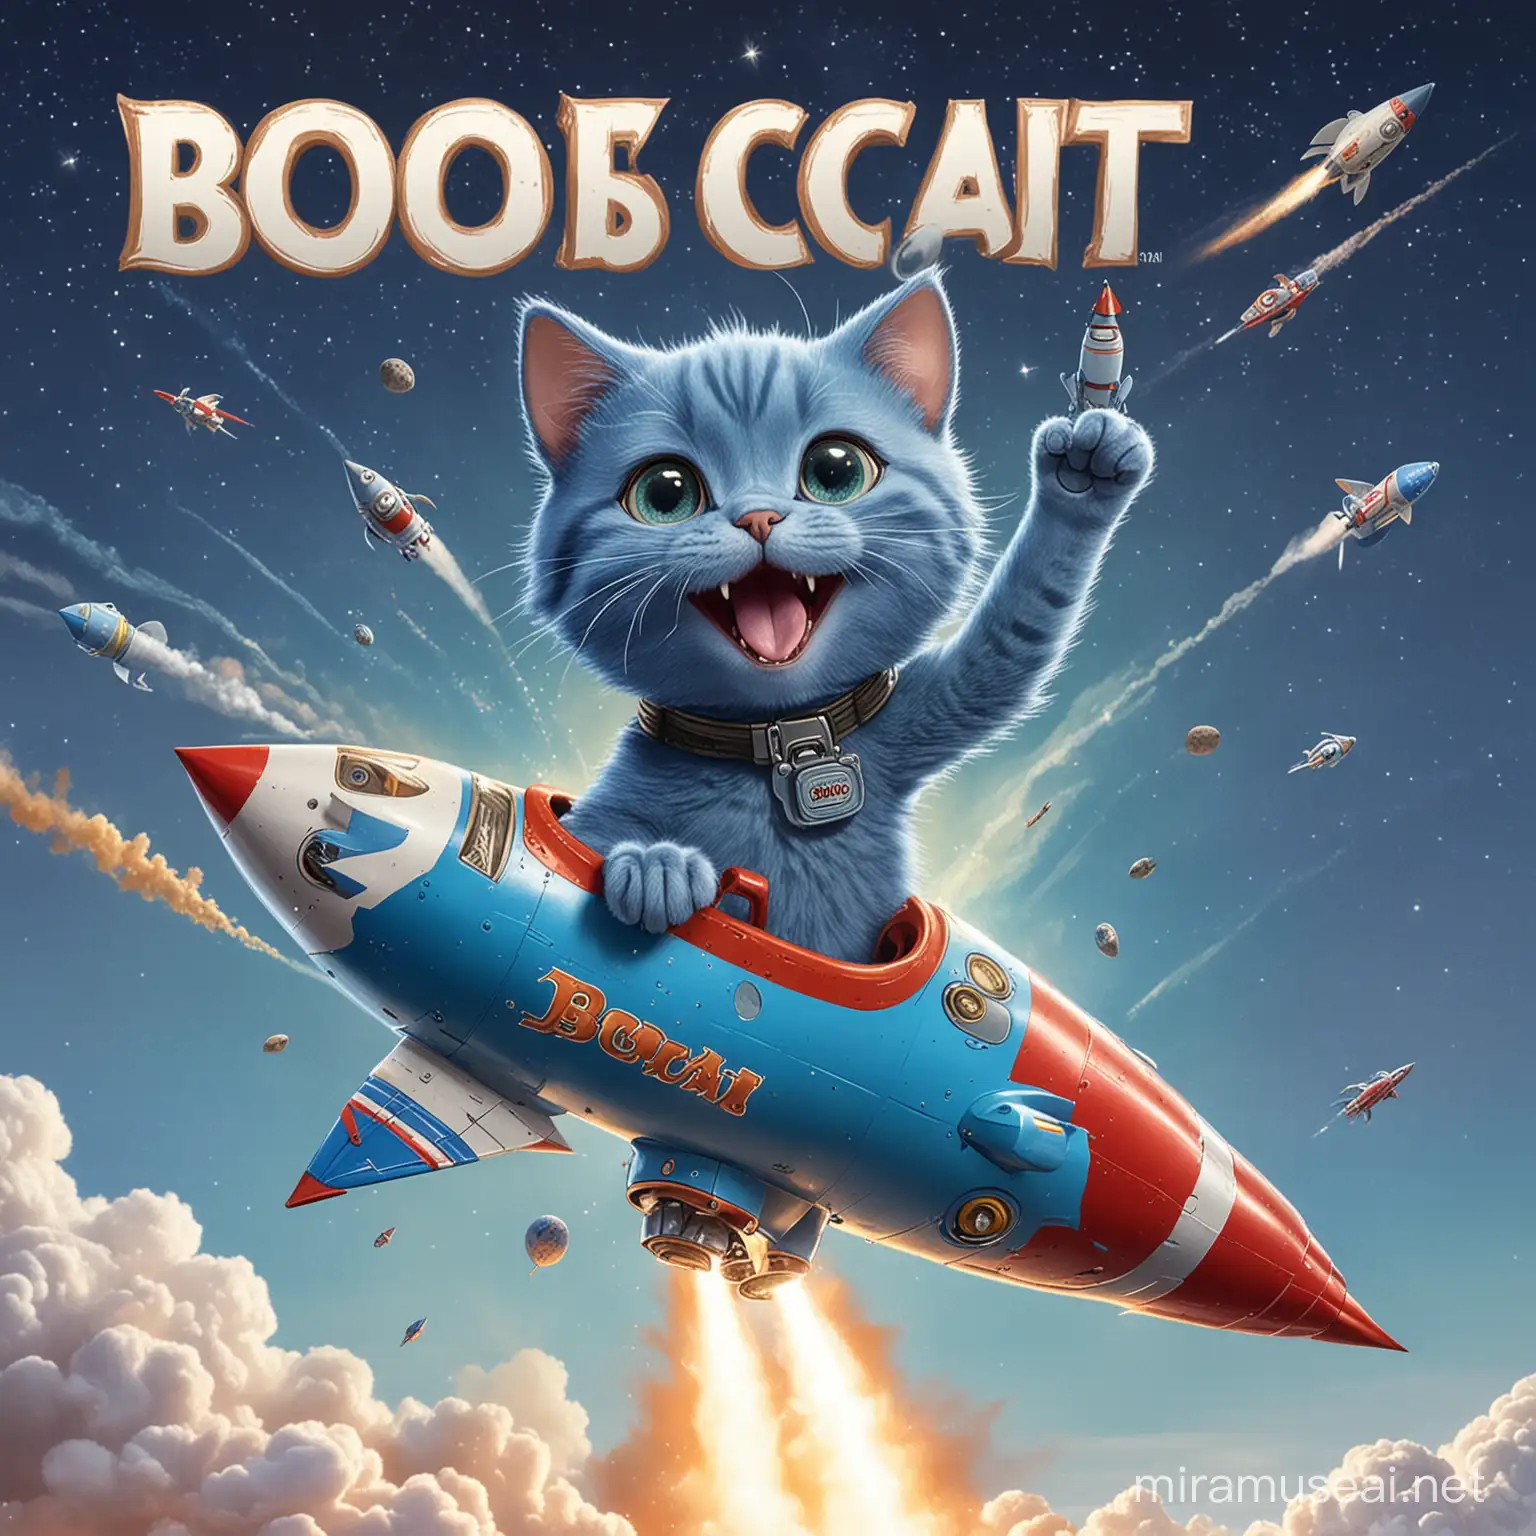 Playful Blue Cat Named Bob Cat Riding Rocket and Sticking Out Tongue